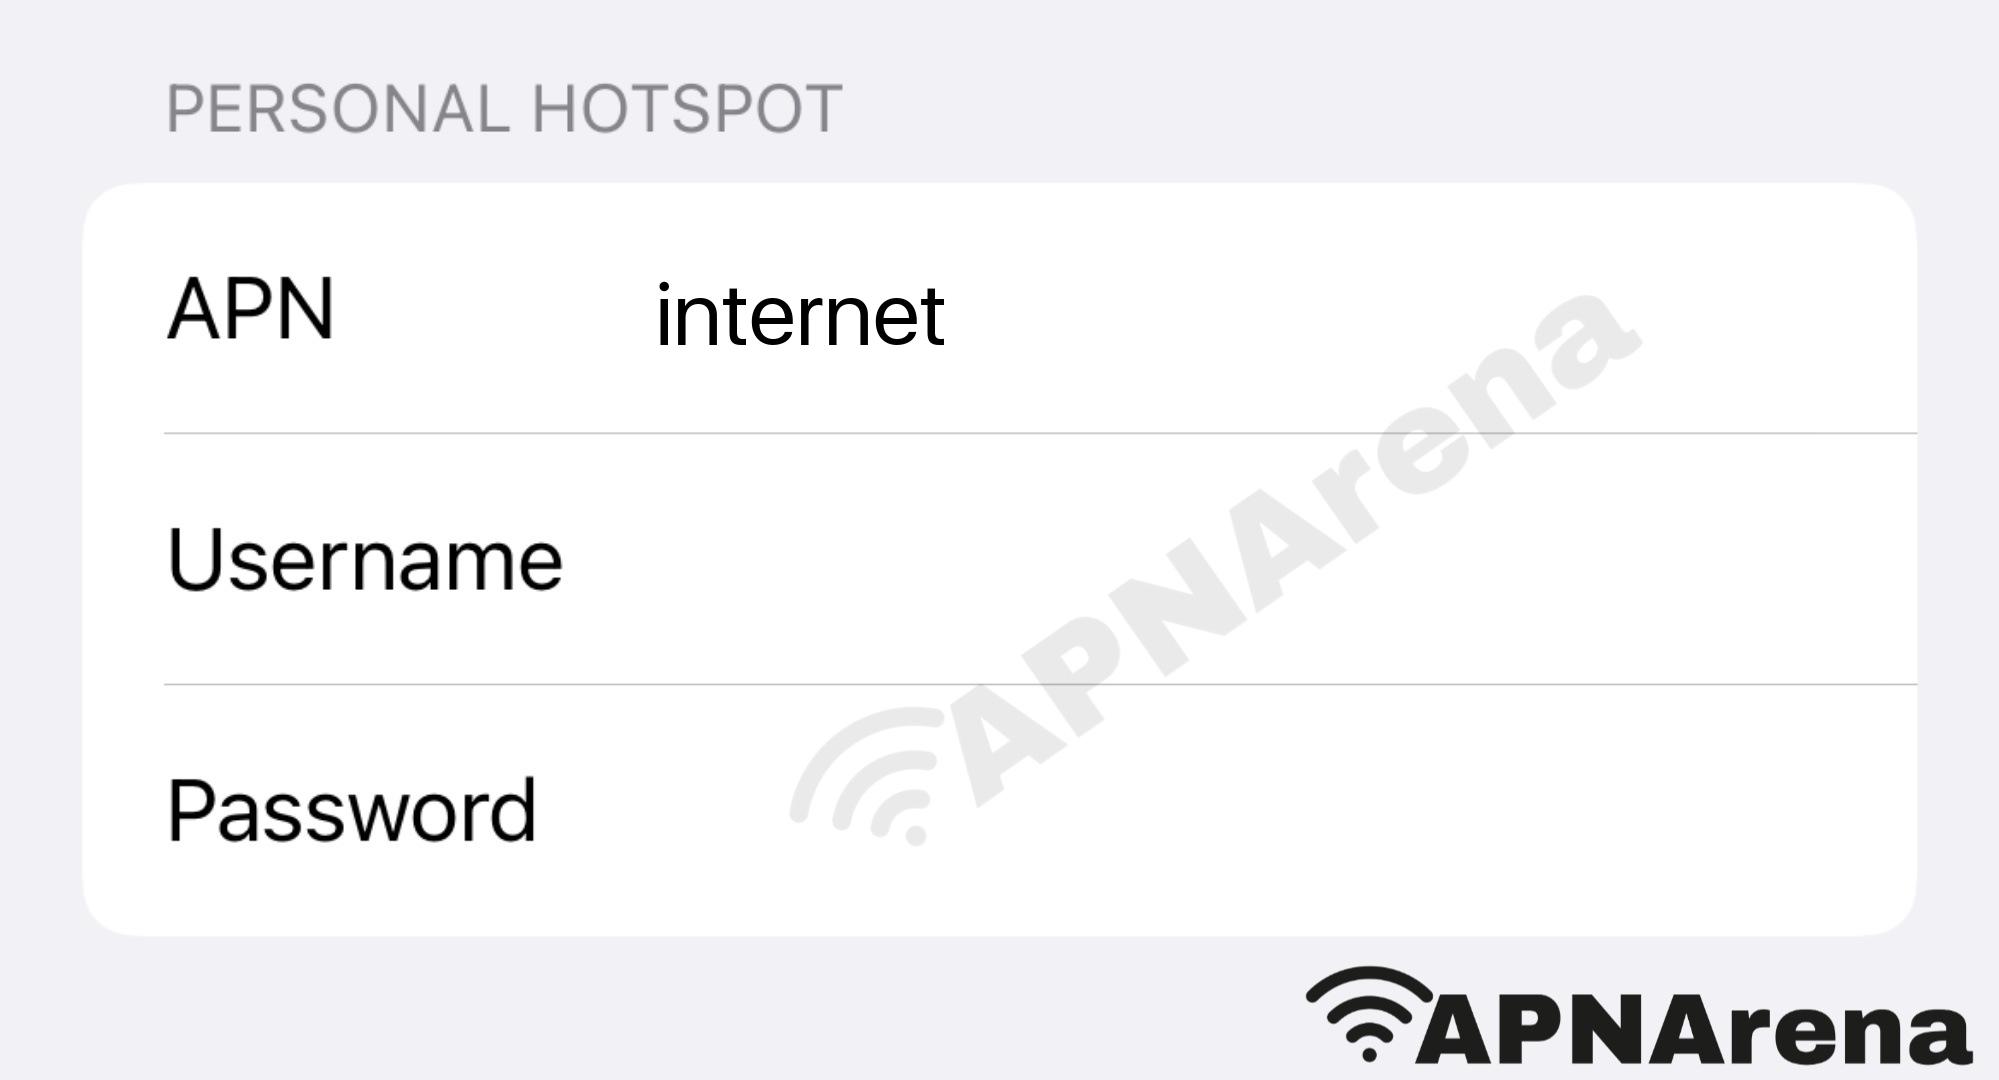 Flash Mobile Personal Hotspot Settings for iPhone